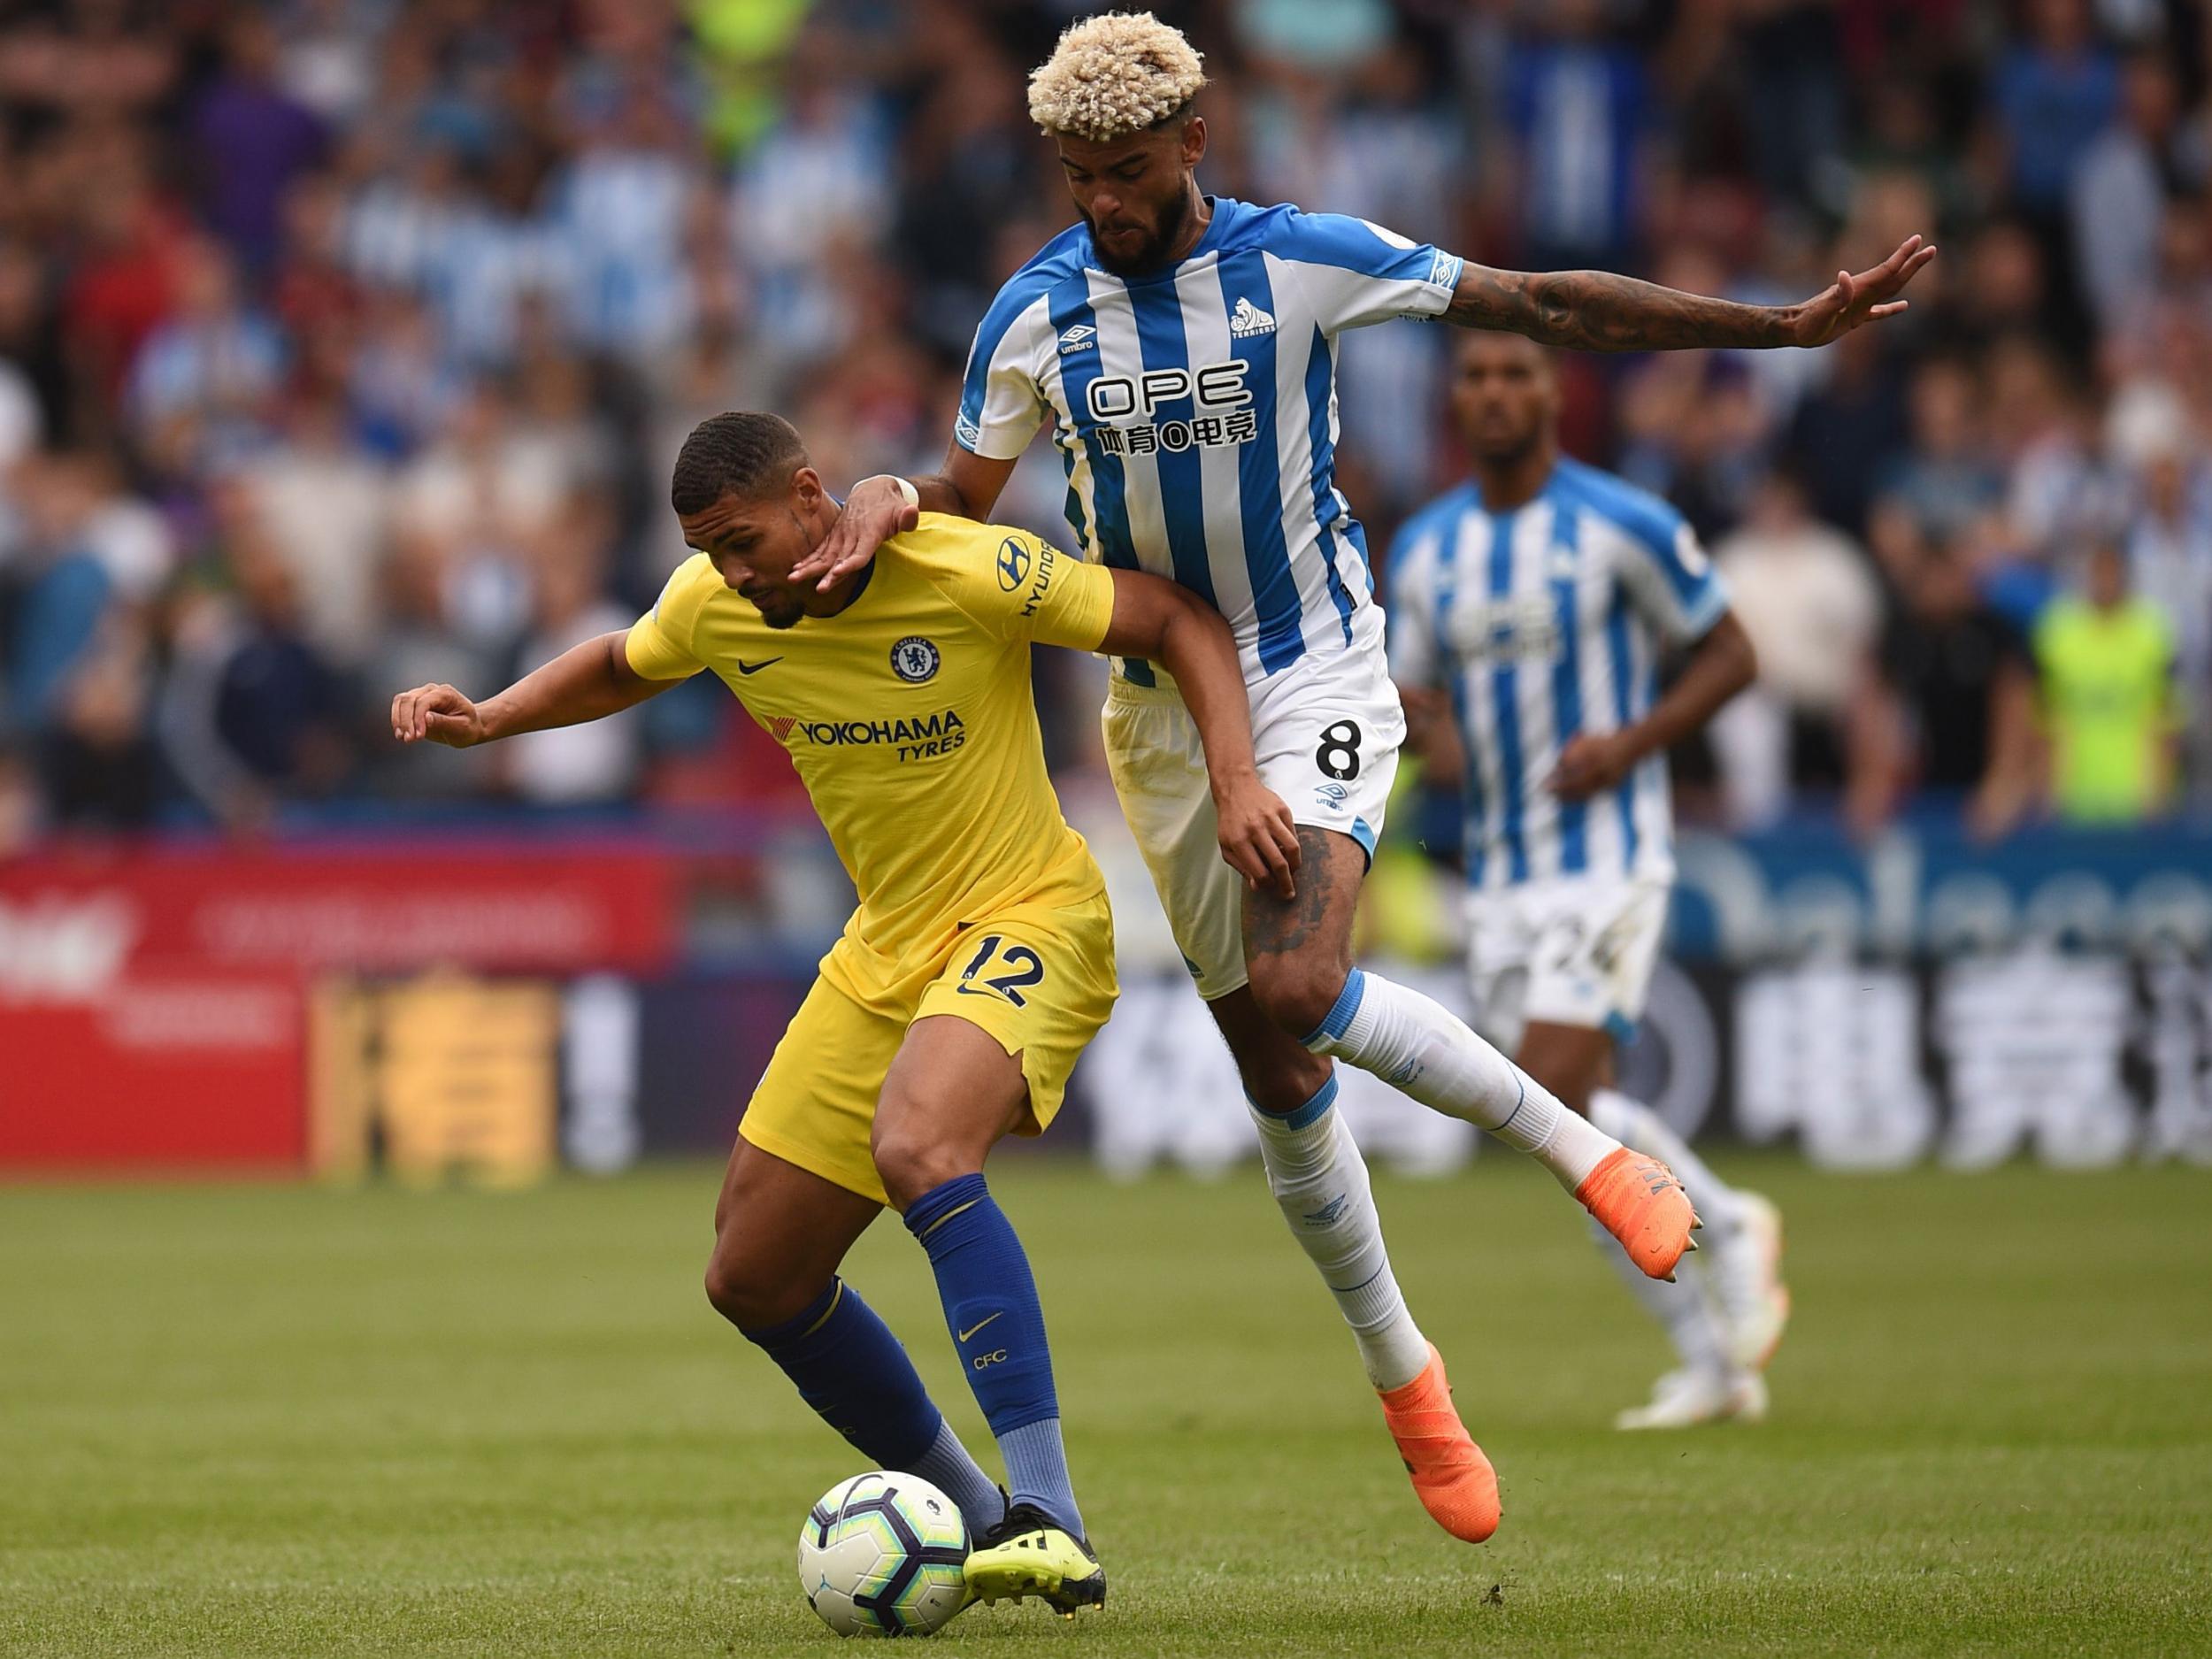 Chelsea boss Maurizio Sarri tells Ruben Loftus-Cheek he needs to be tactically better if he is to make the first team